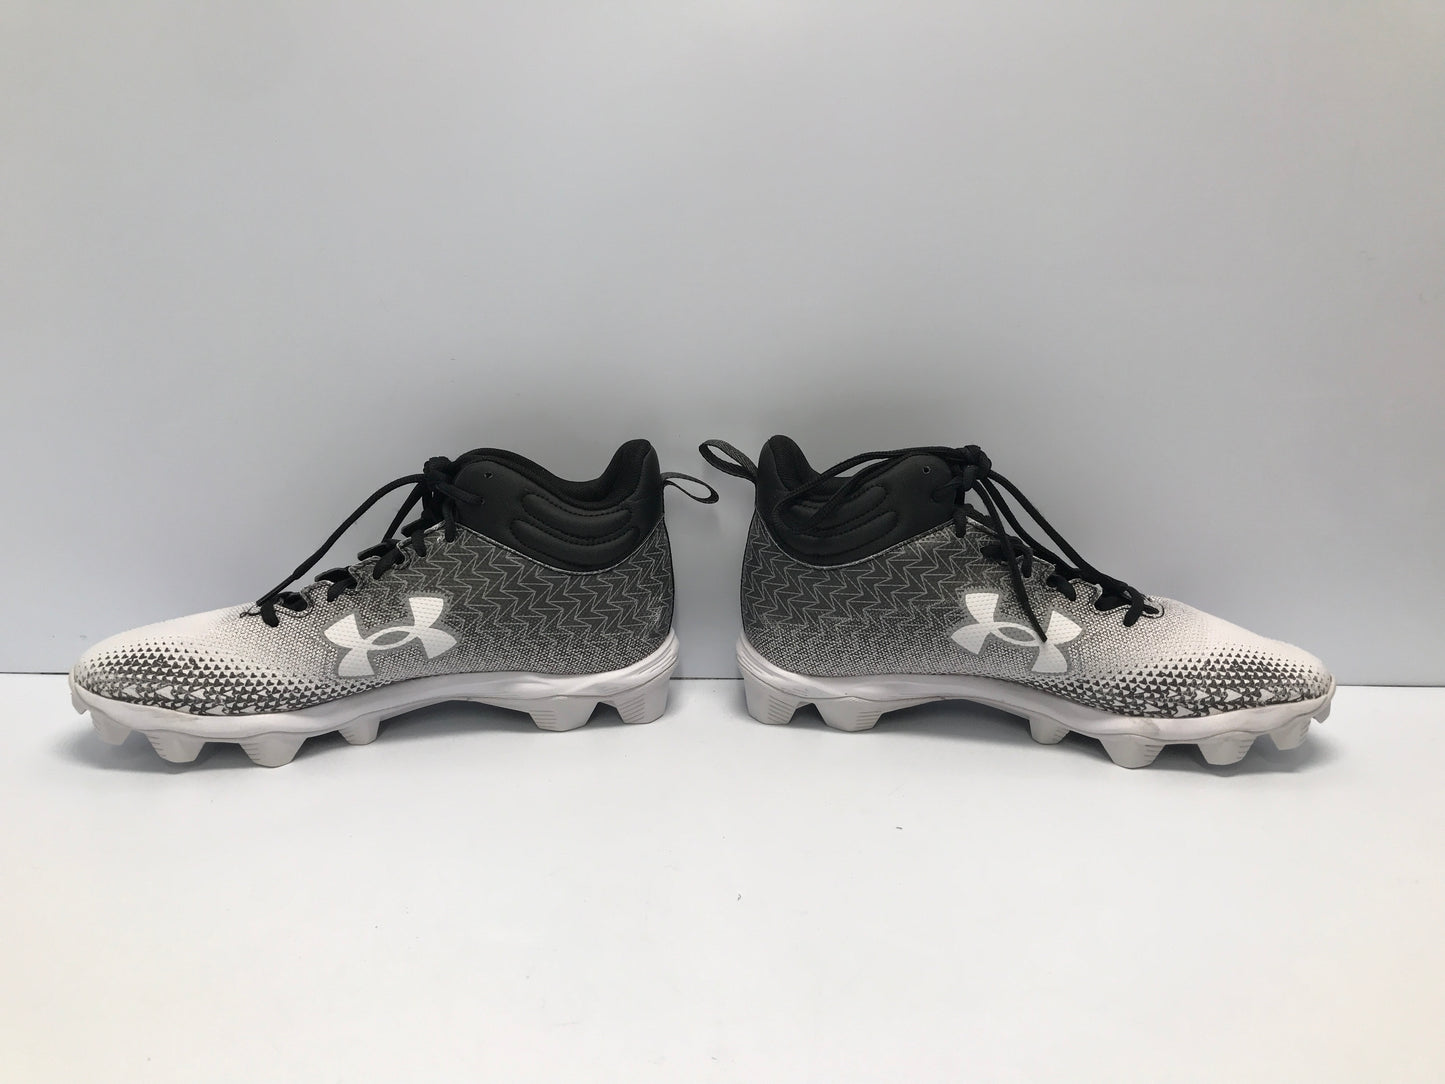 Baseball Shoes Cleats Men's Size 9.5 Black White Grey High Tops Under Armour Like New